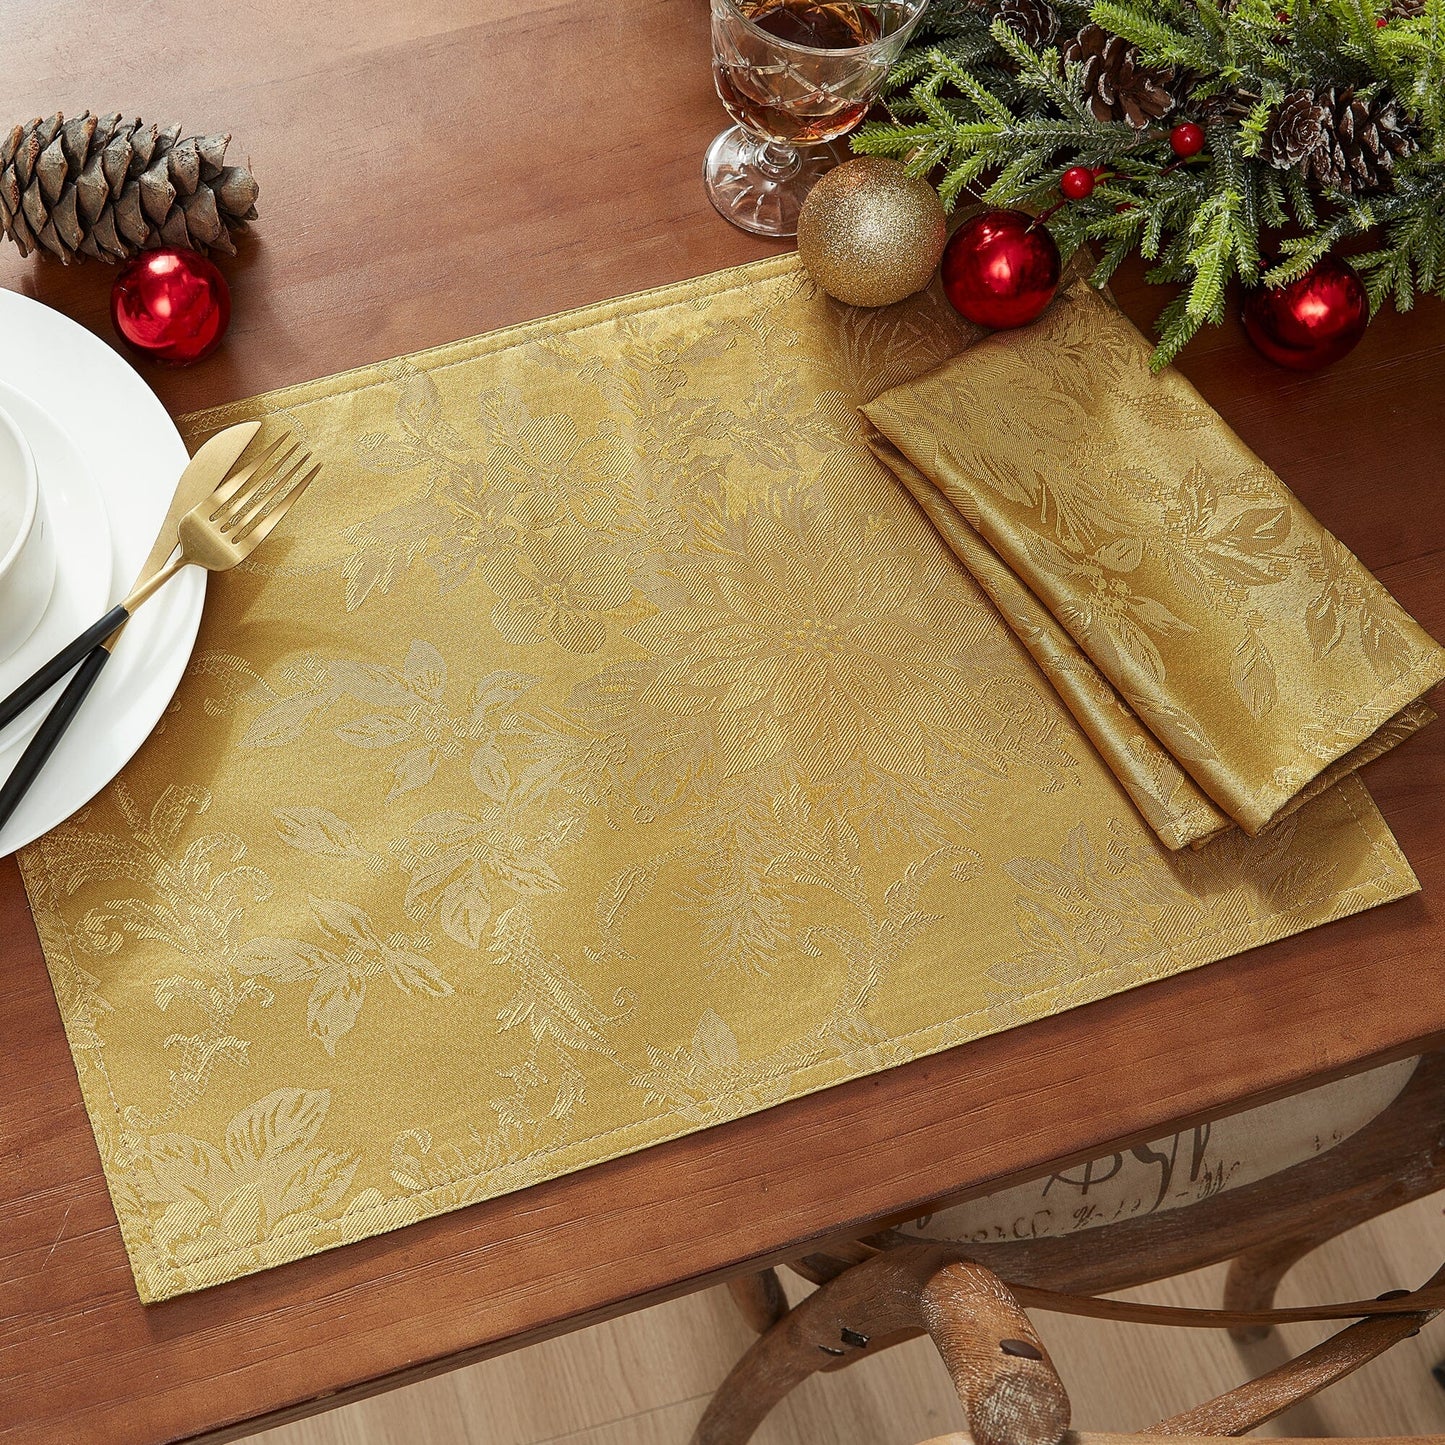 Poinsettia Elegance Jacquard Water and Stain Resistant Holiday Placemat, Set of 4